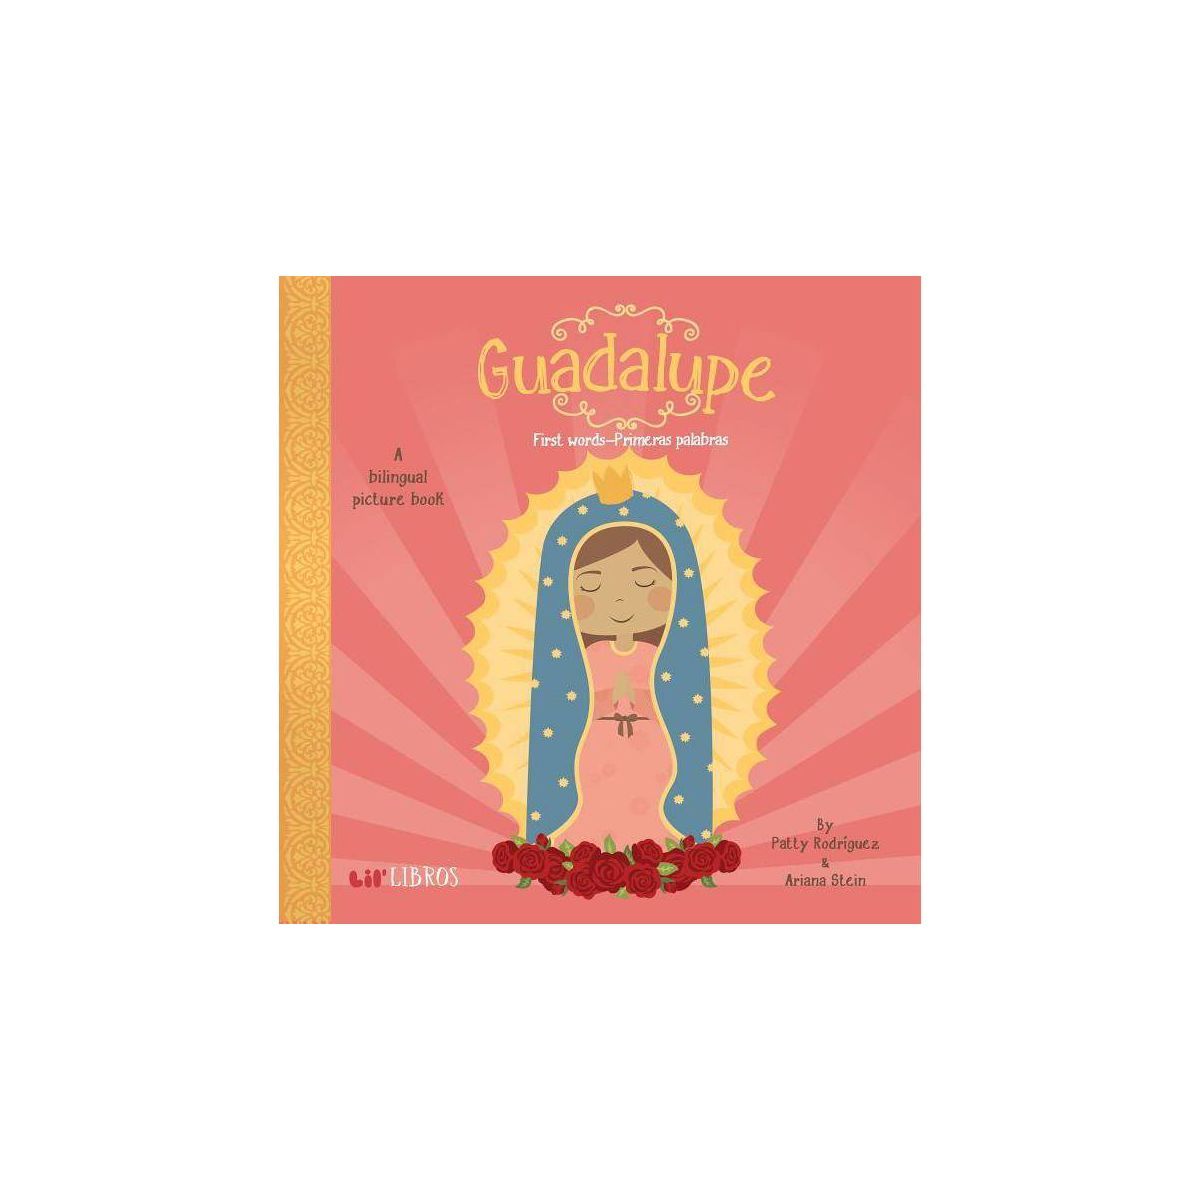 Guadalupe : First Words / Primeras Palabras (Hardcover) by Patty Rodriguez | Target